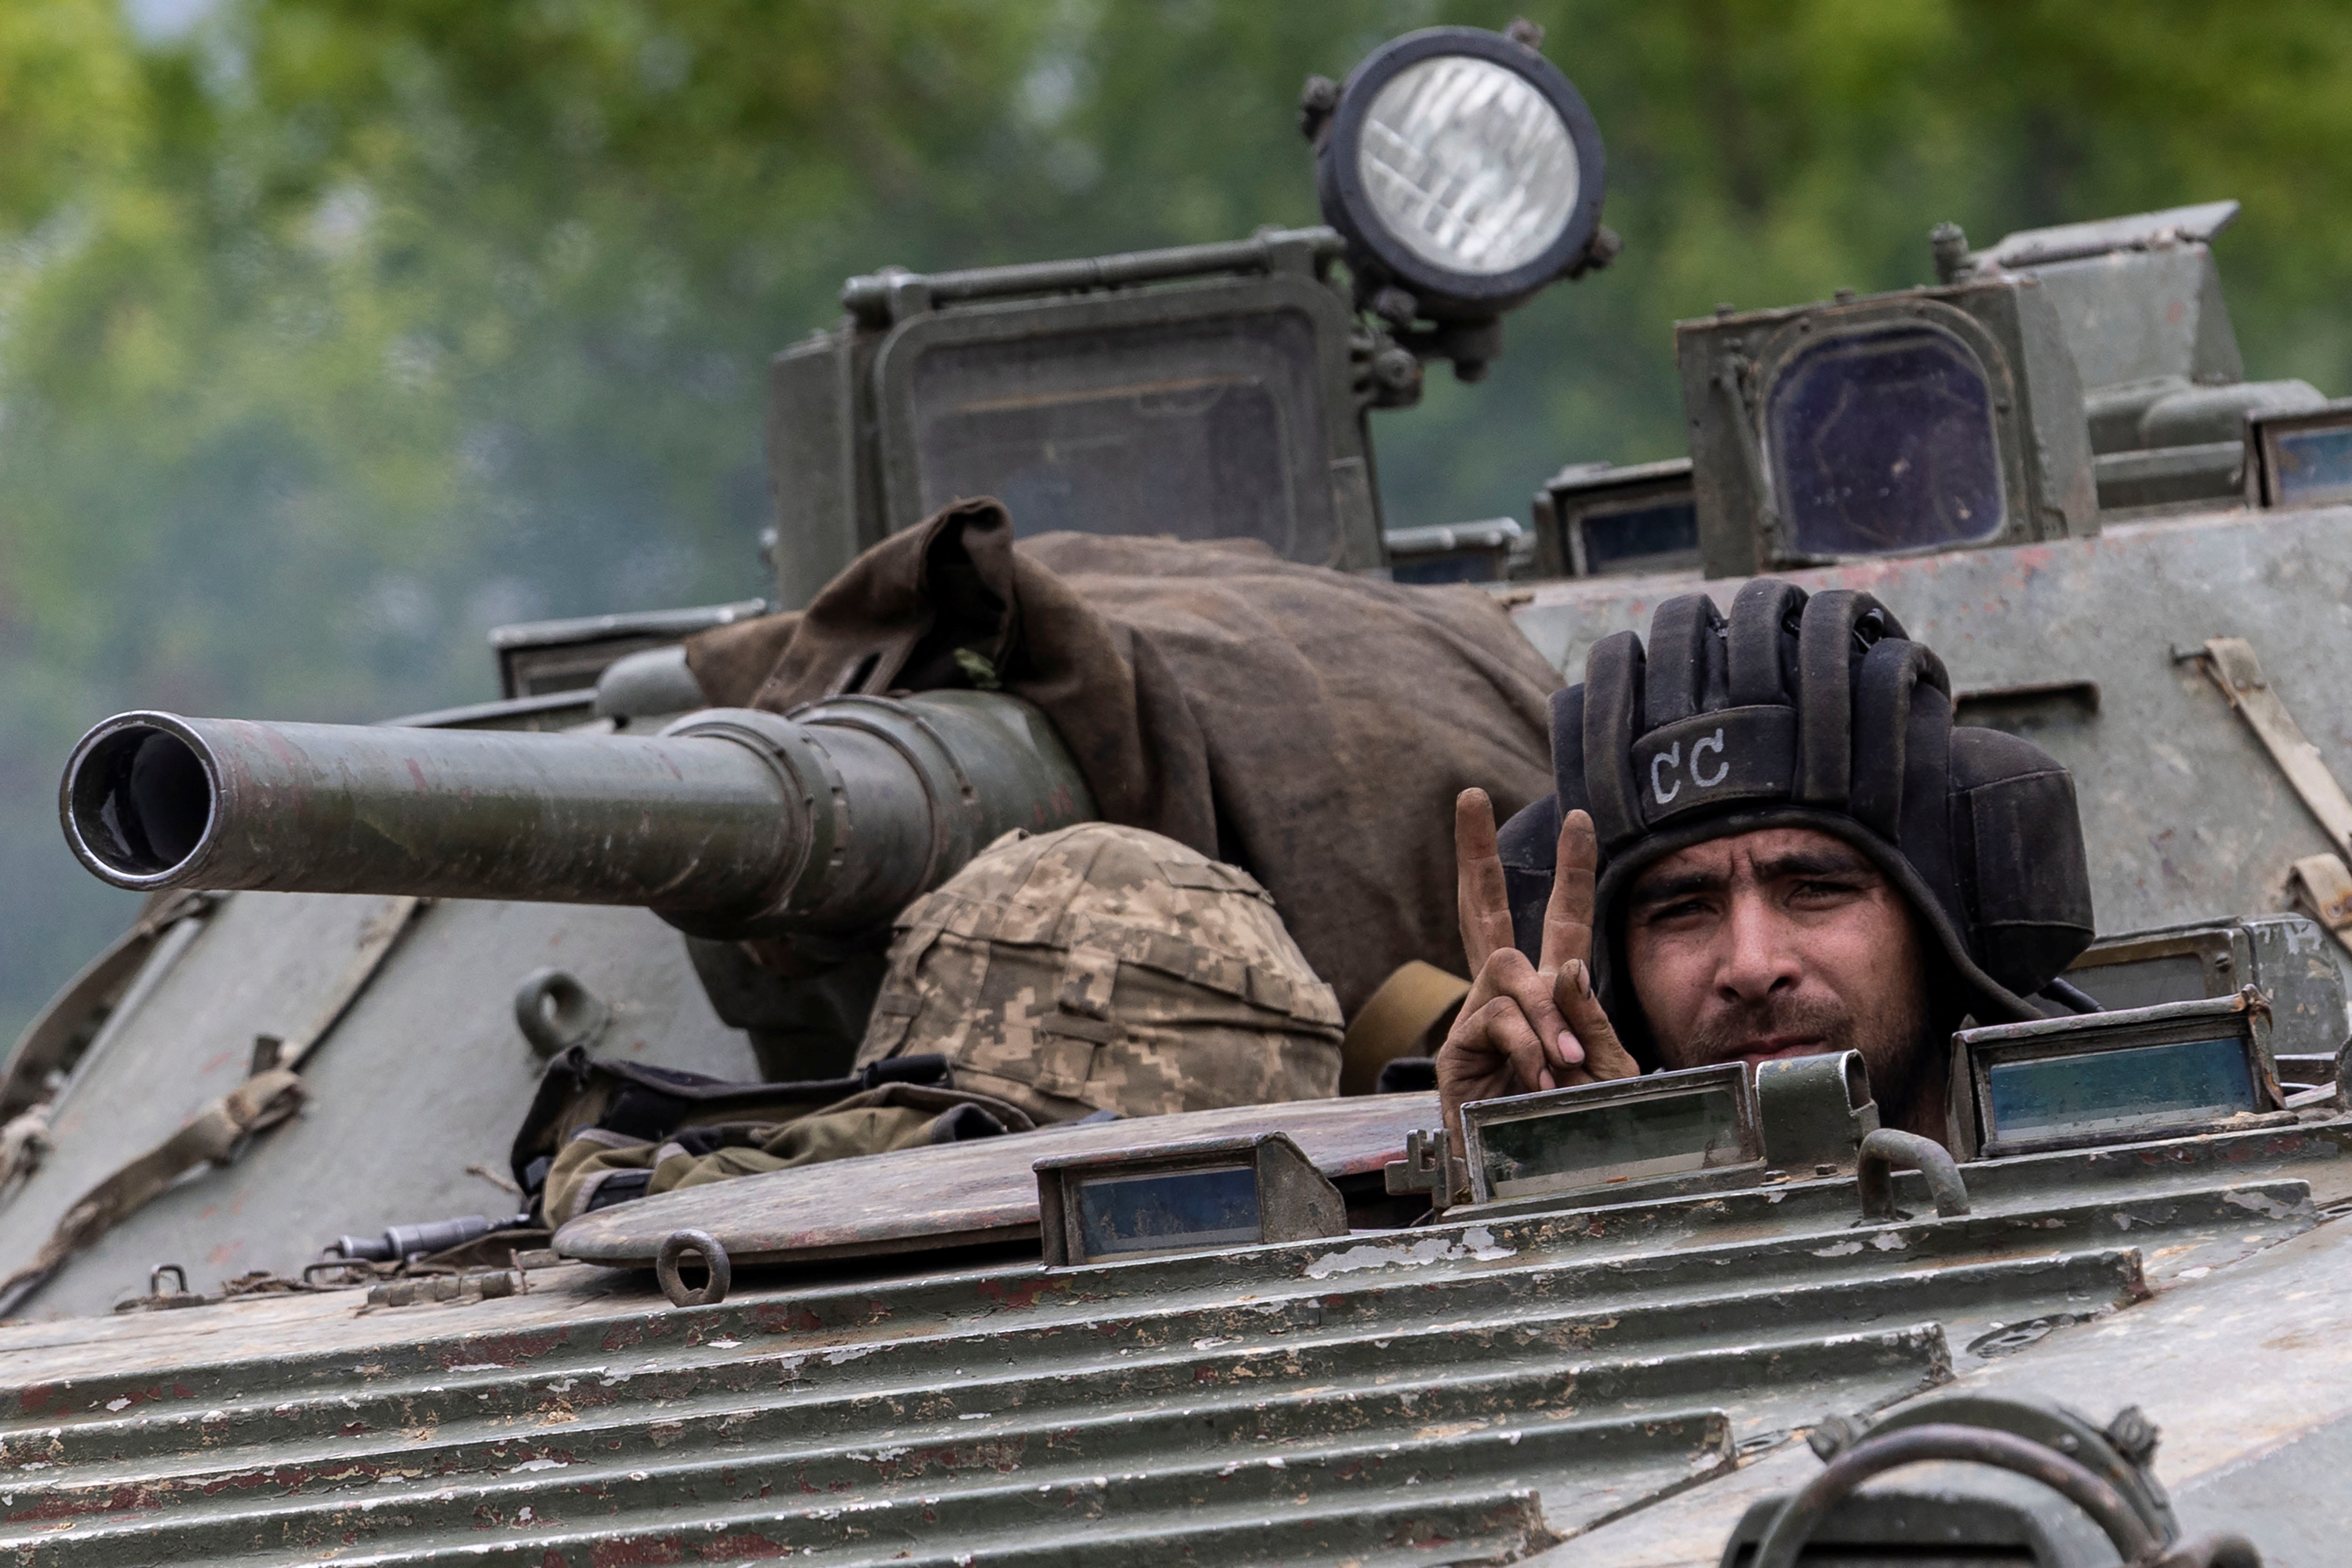 An Ukrainian service member rides on top of a military vehicle, amid Russia's invasion of Ukraine, on the road from Bakhmut to Kostyantynivka, in the Donetsk region, Ukraine